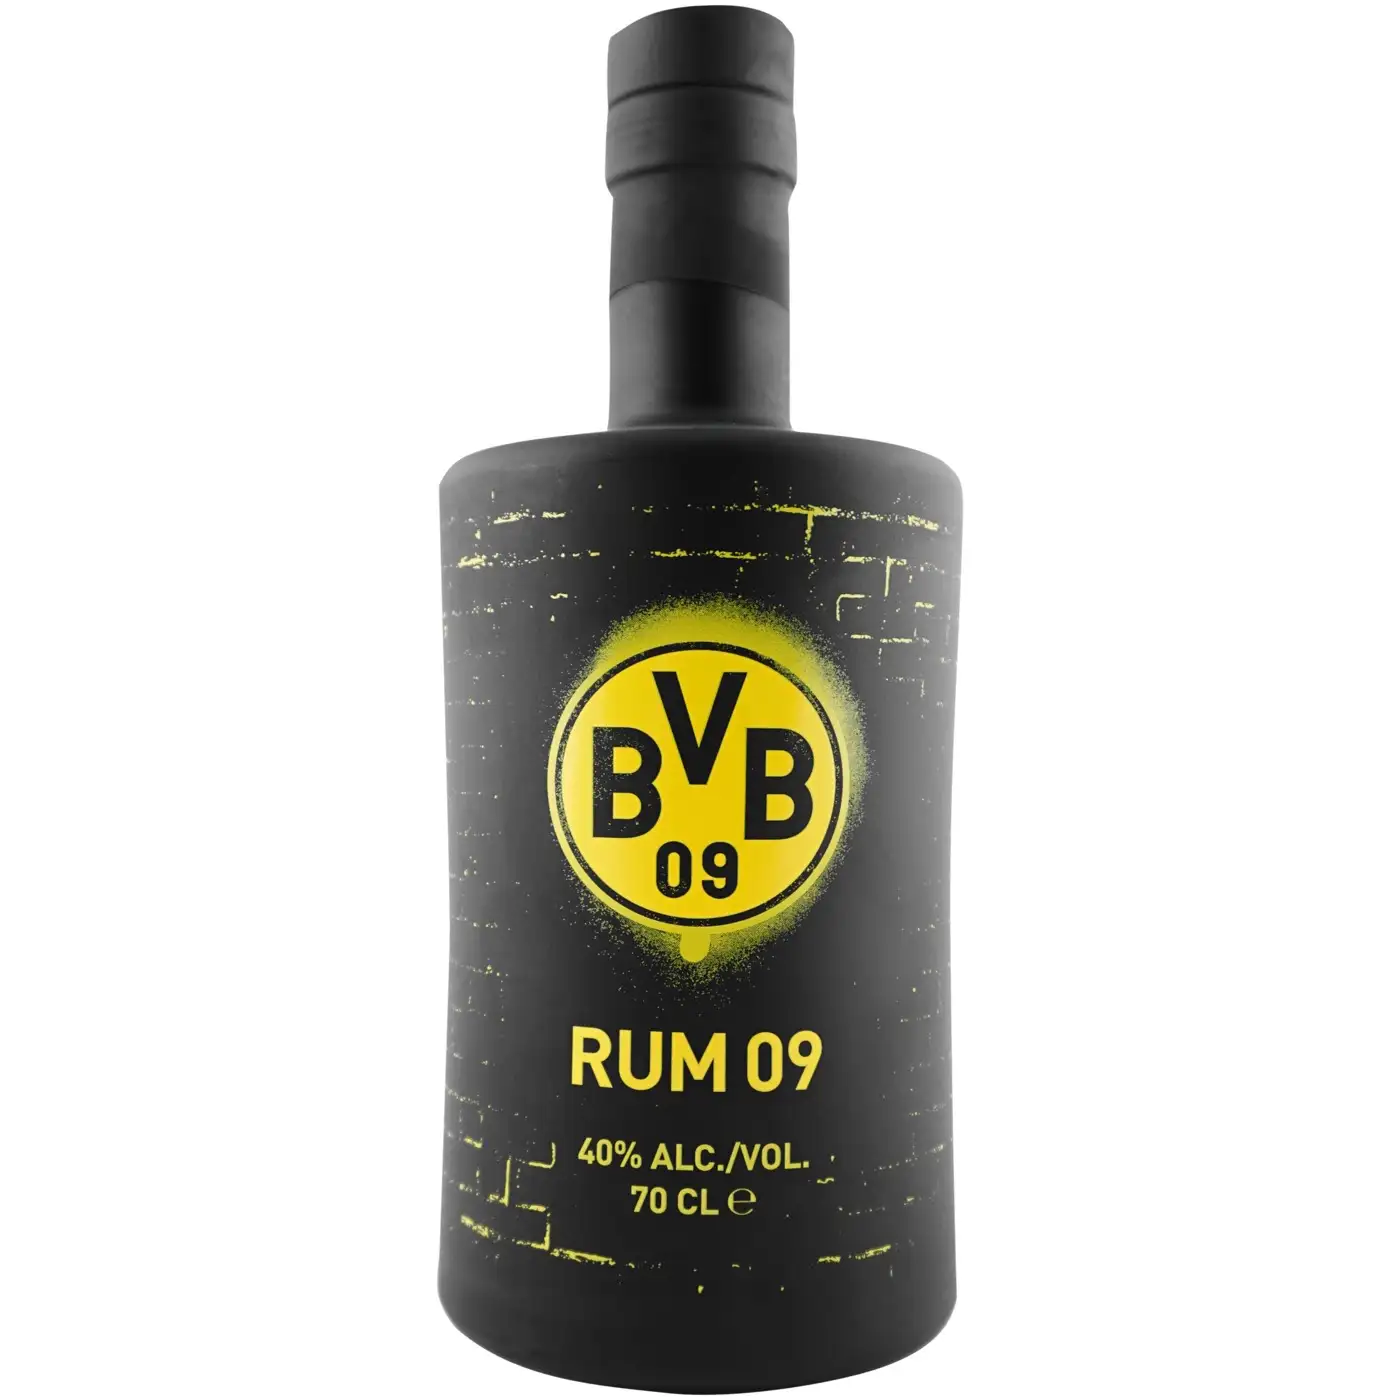 Image of the front of the bottle of the rum BVB Rum 09